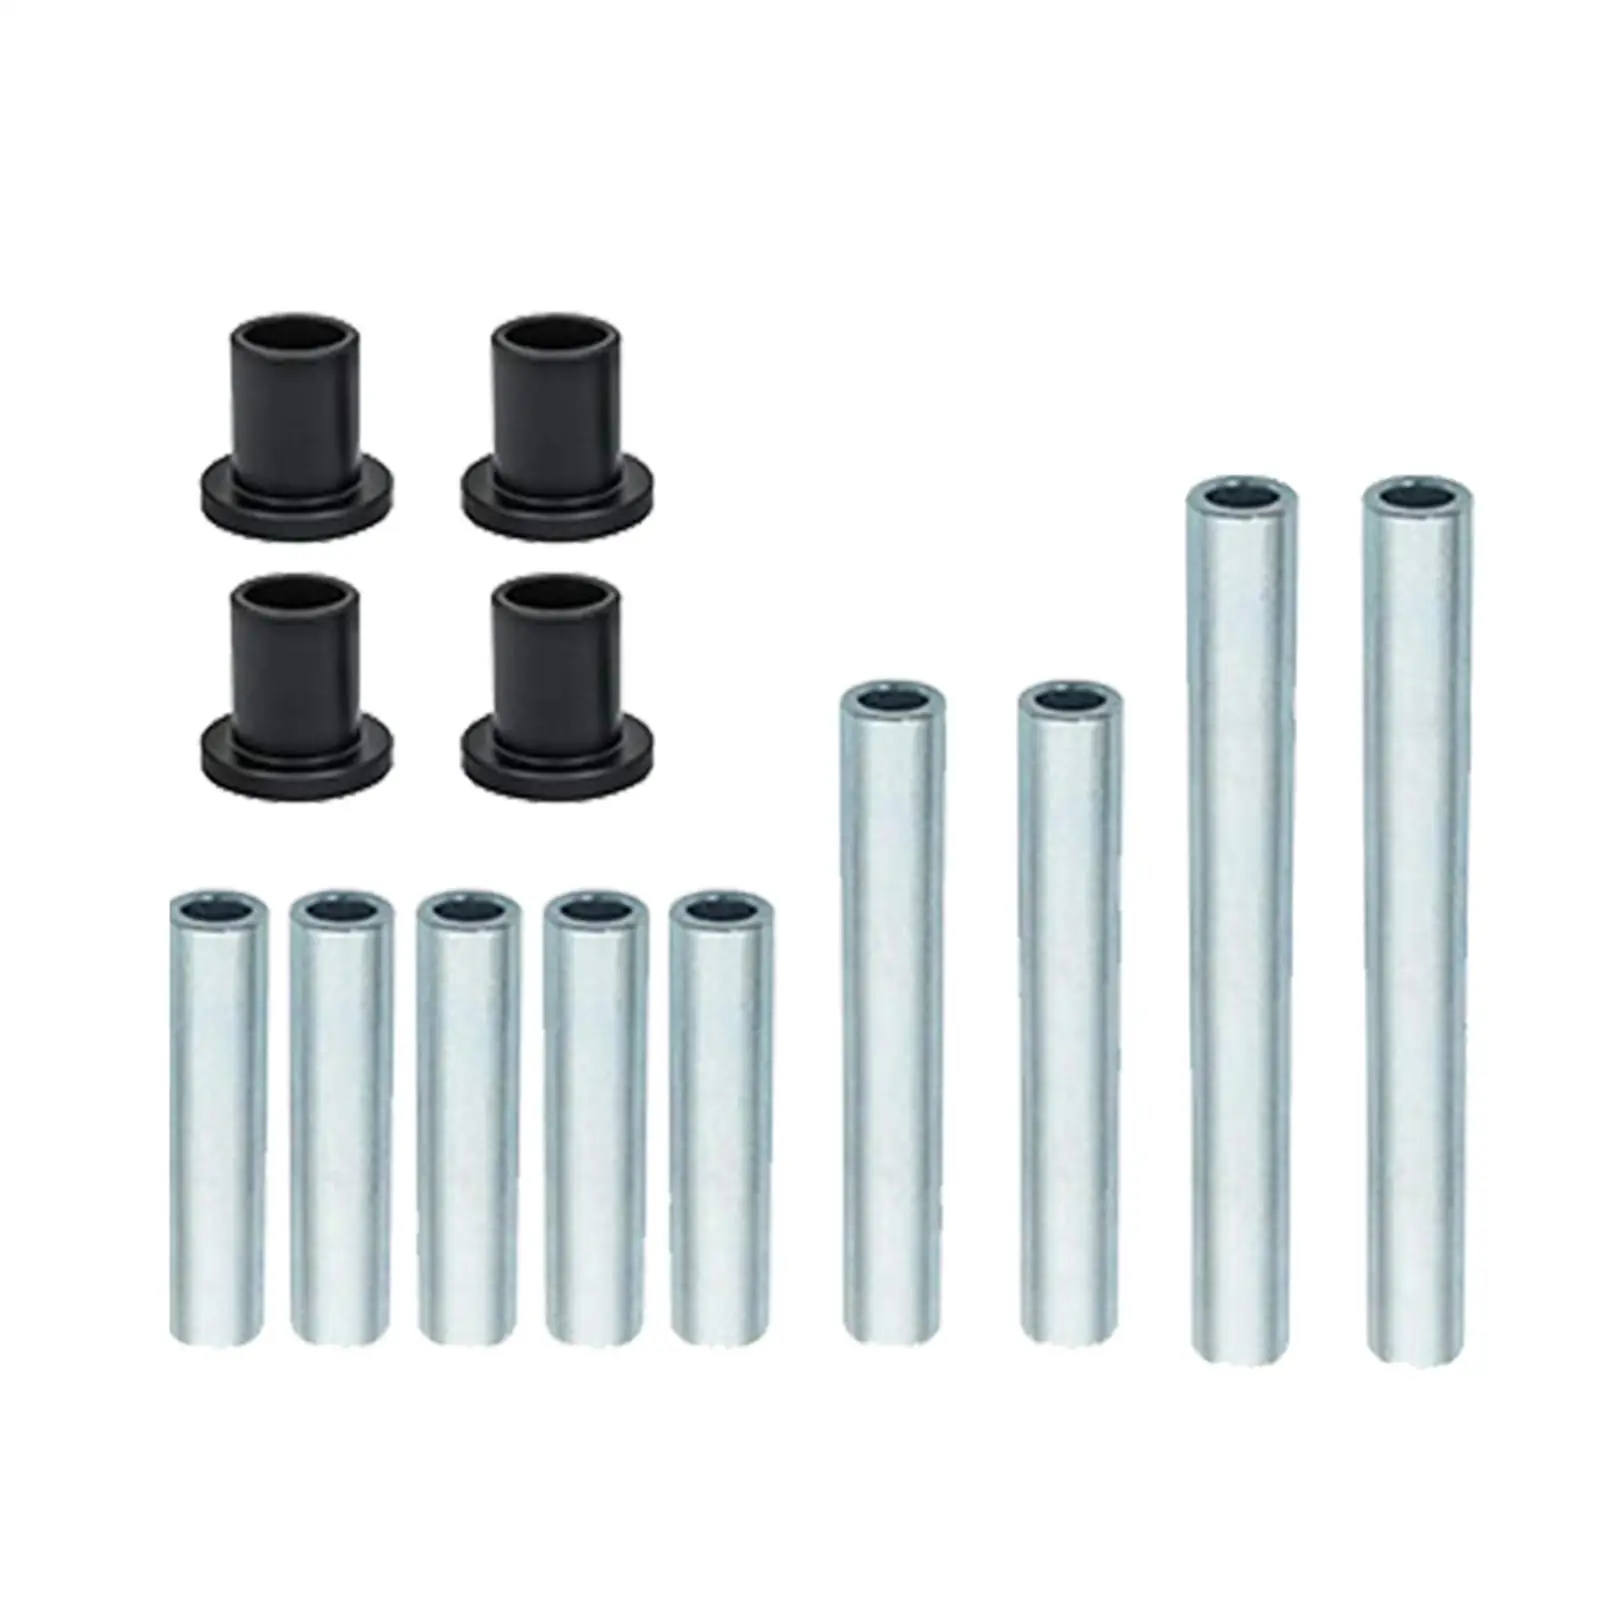 Metal Control Arm Bushing Set Easy to Use Easy Installation Accessory Replace for Polaris Ranger 2010-2014 XP 800